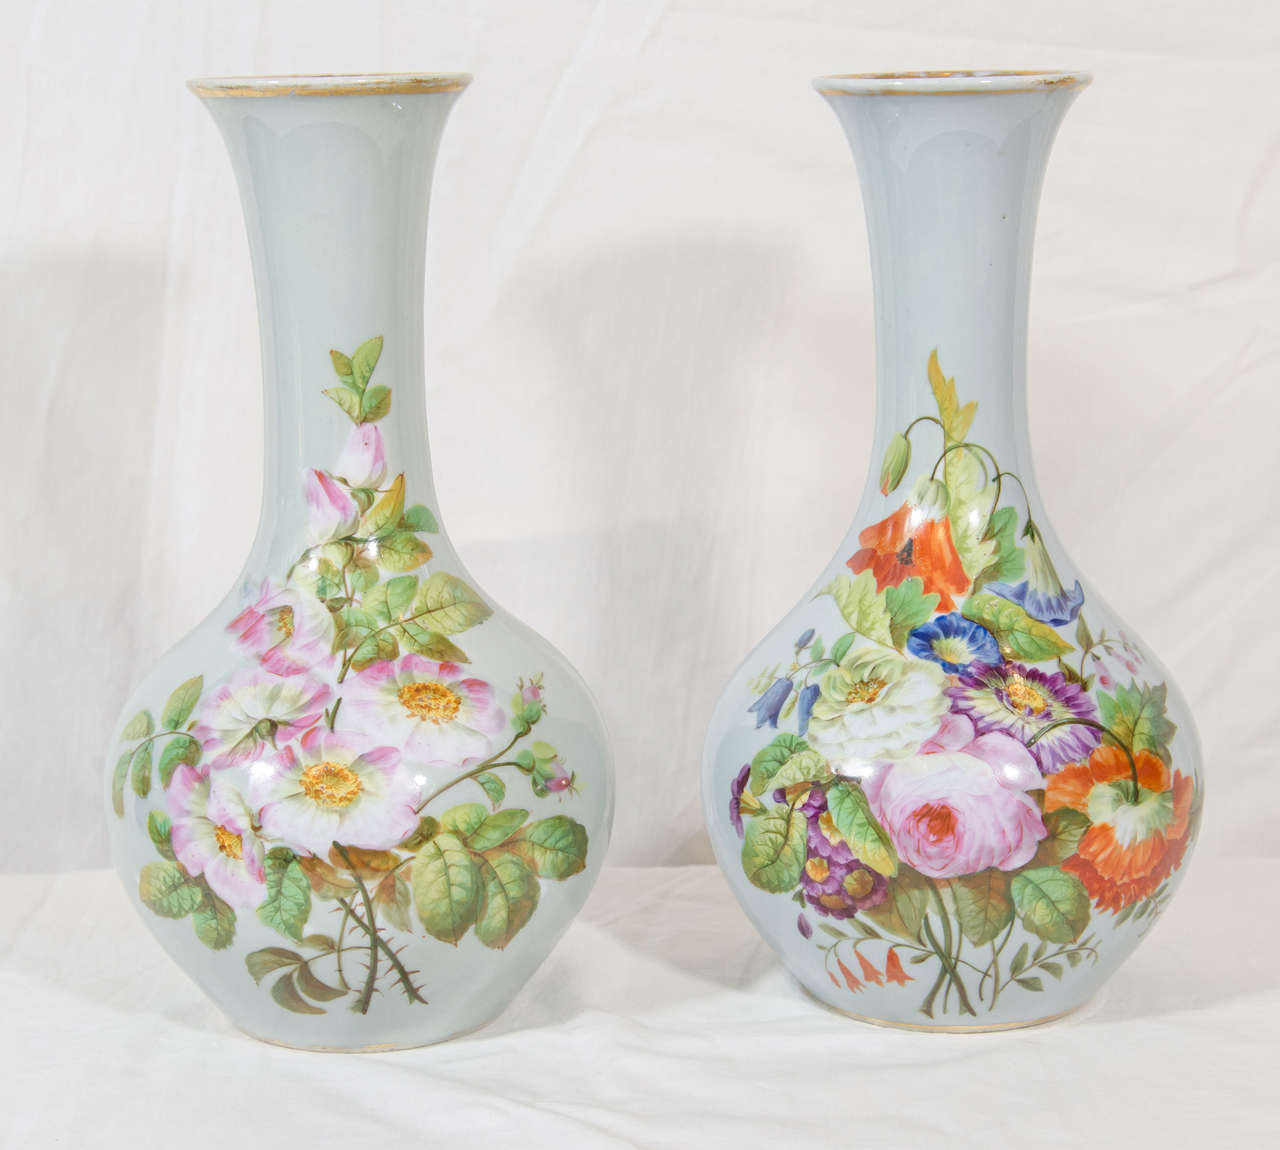 This lovely pair of handpainted 19th-century opaline vases feature gorgeous flowers, each with a bouquet of peonies, tulips, and other flowers on a light blue ground. 
The glass is slightly translucent, as opaline should be.
Dimensions: 11